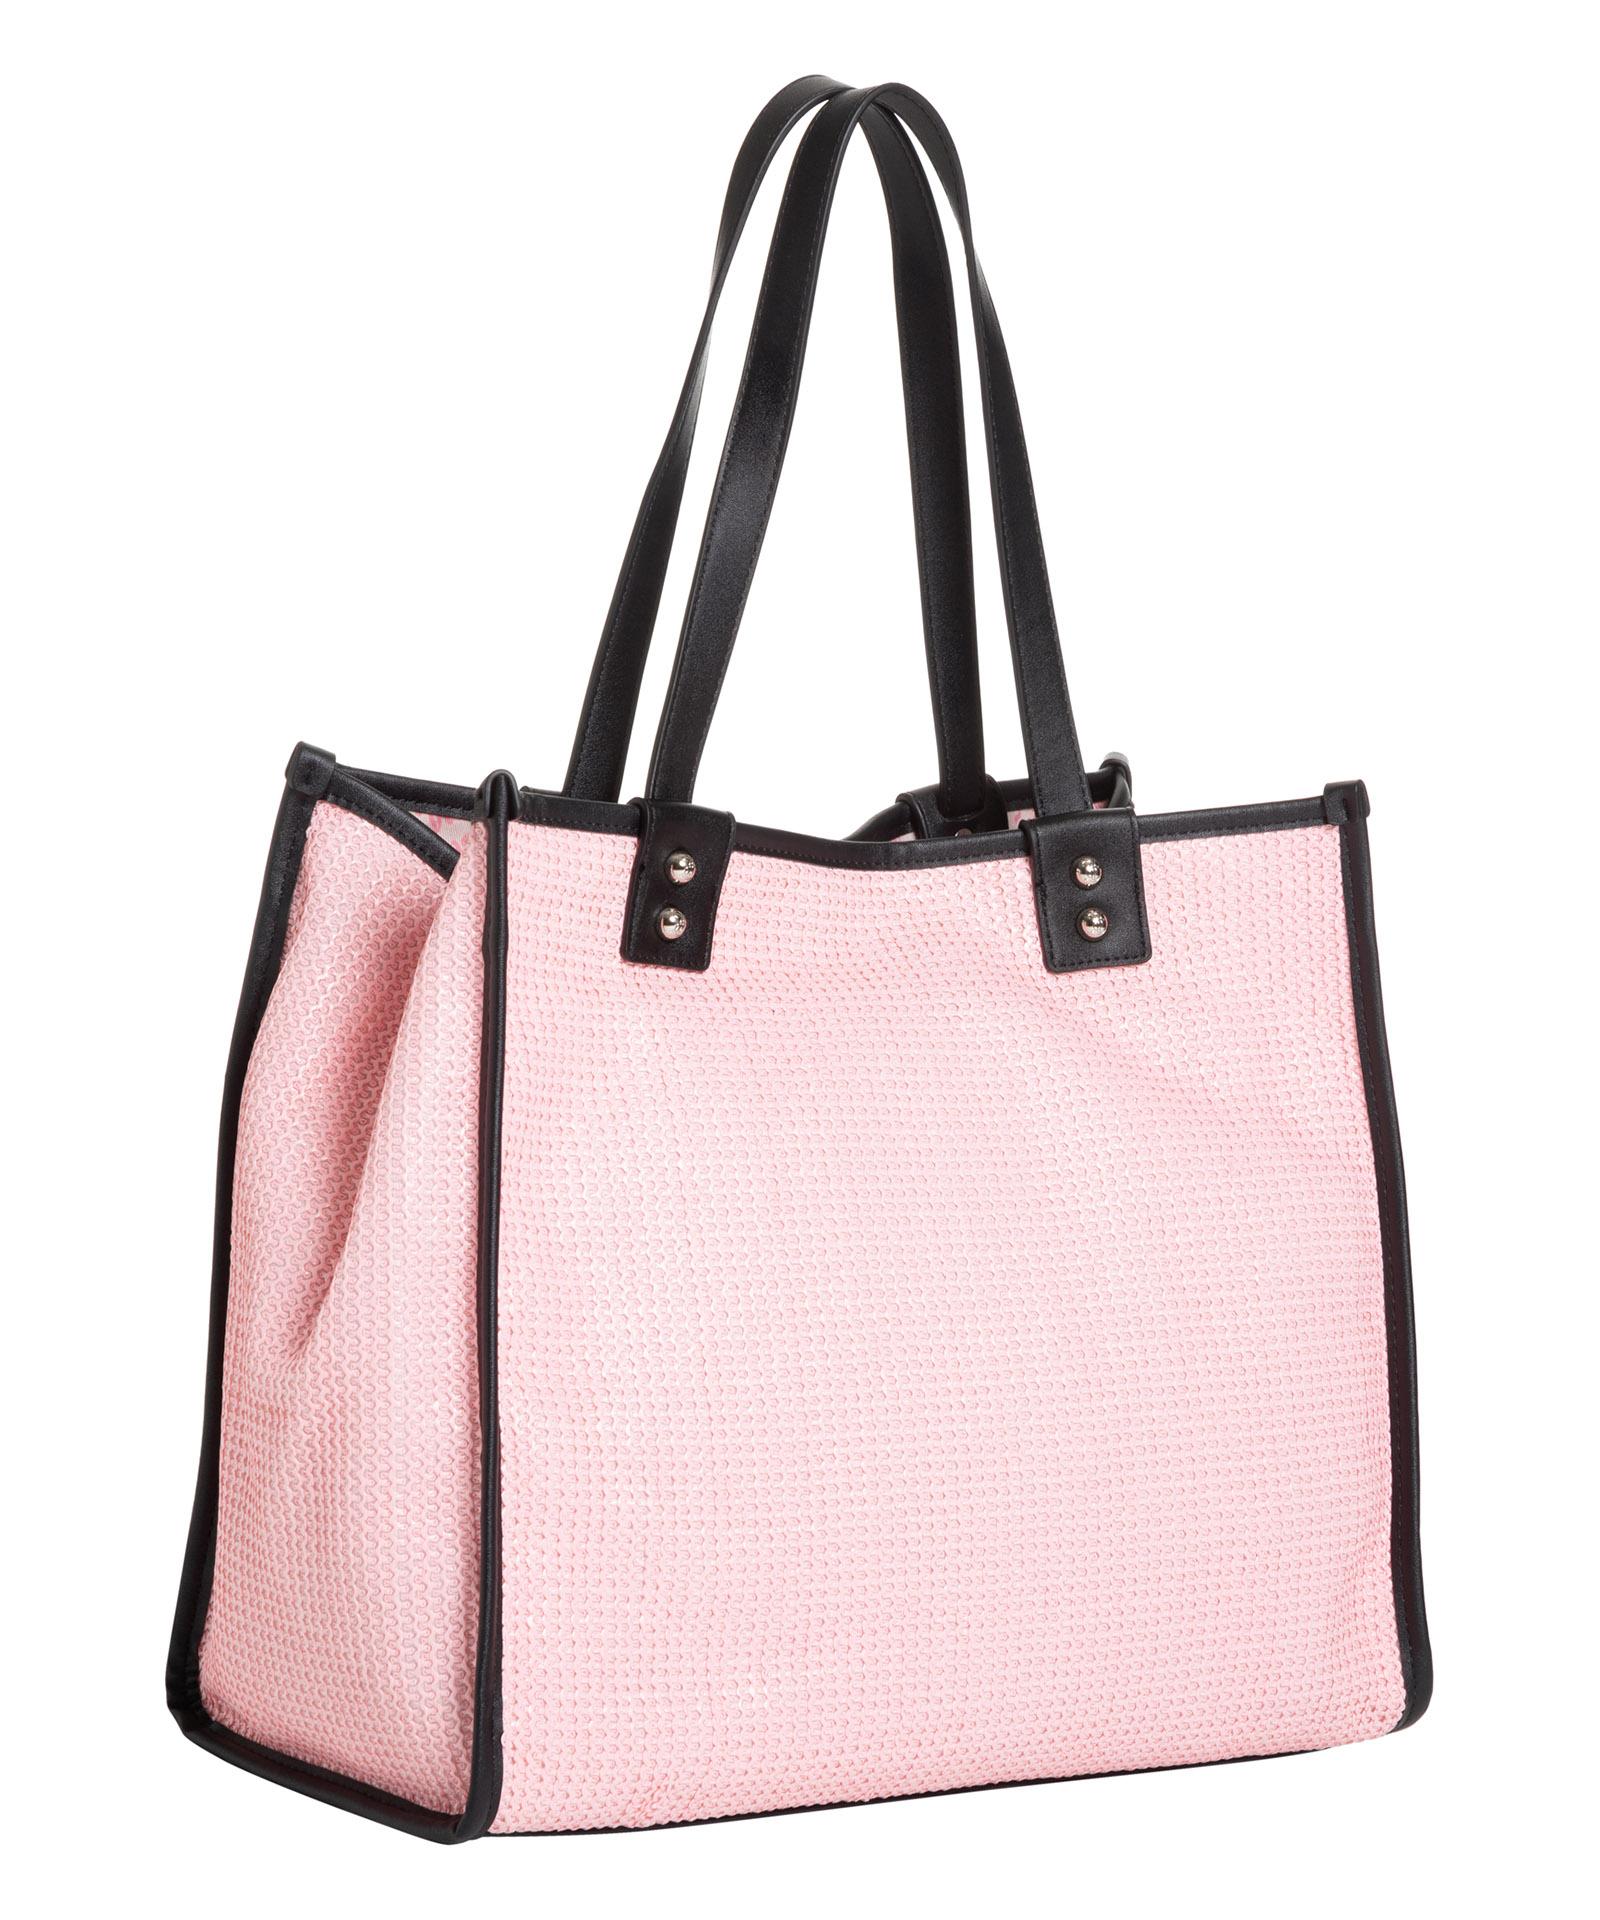 Juicy Couture Tote Bag in Pink | Lyst